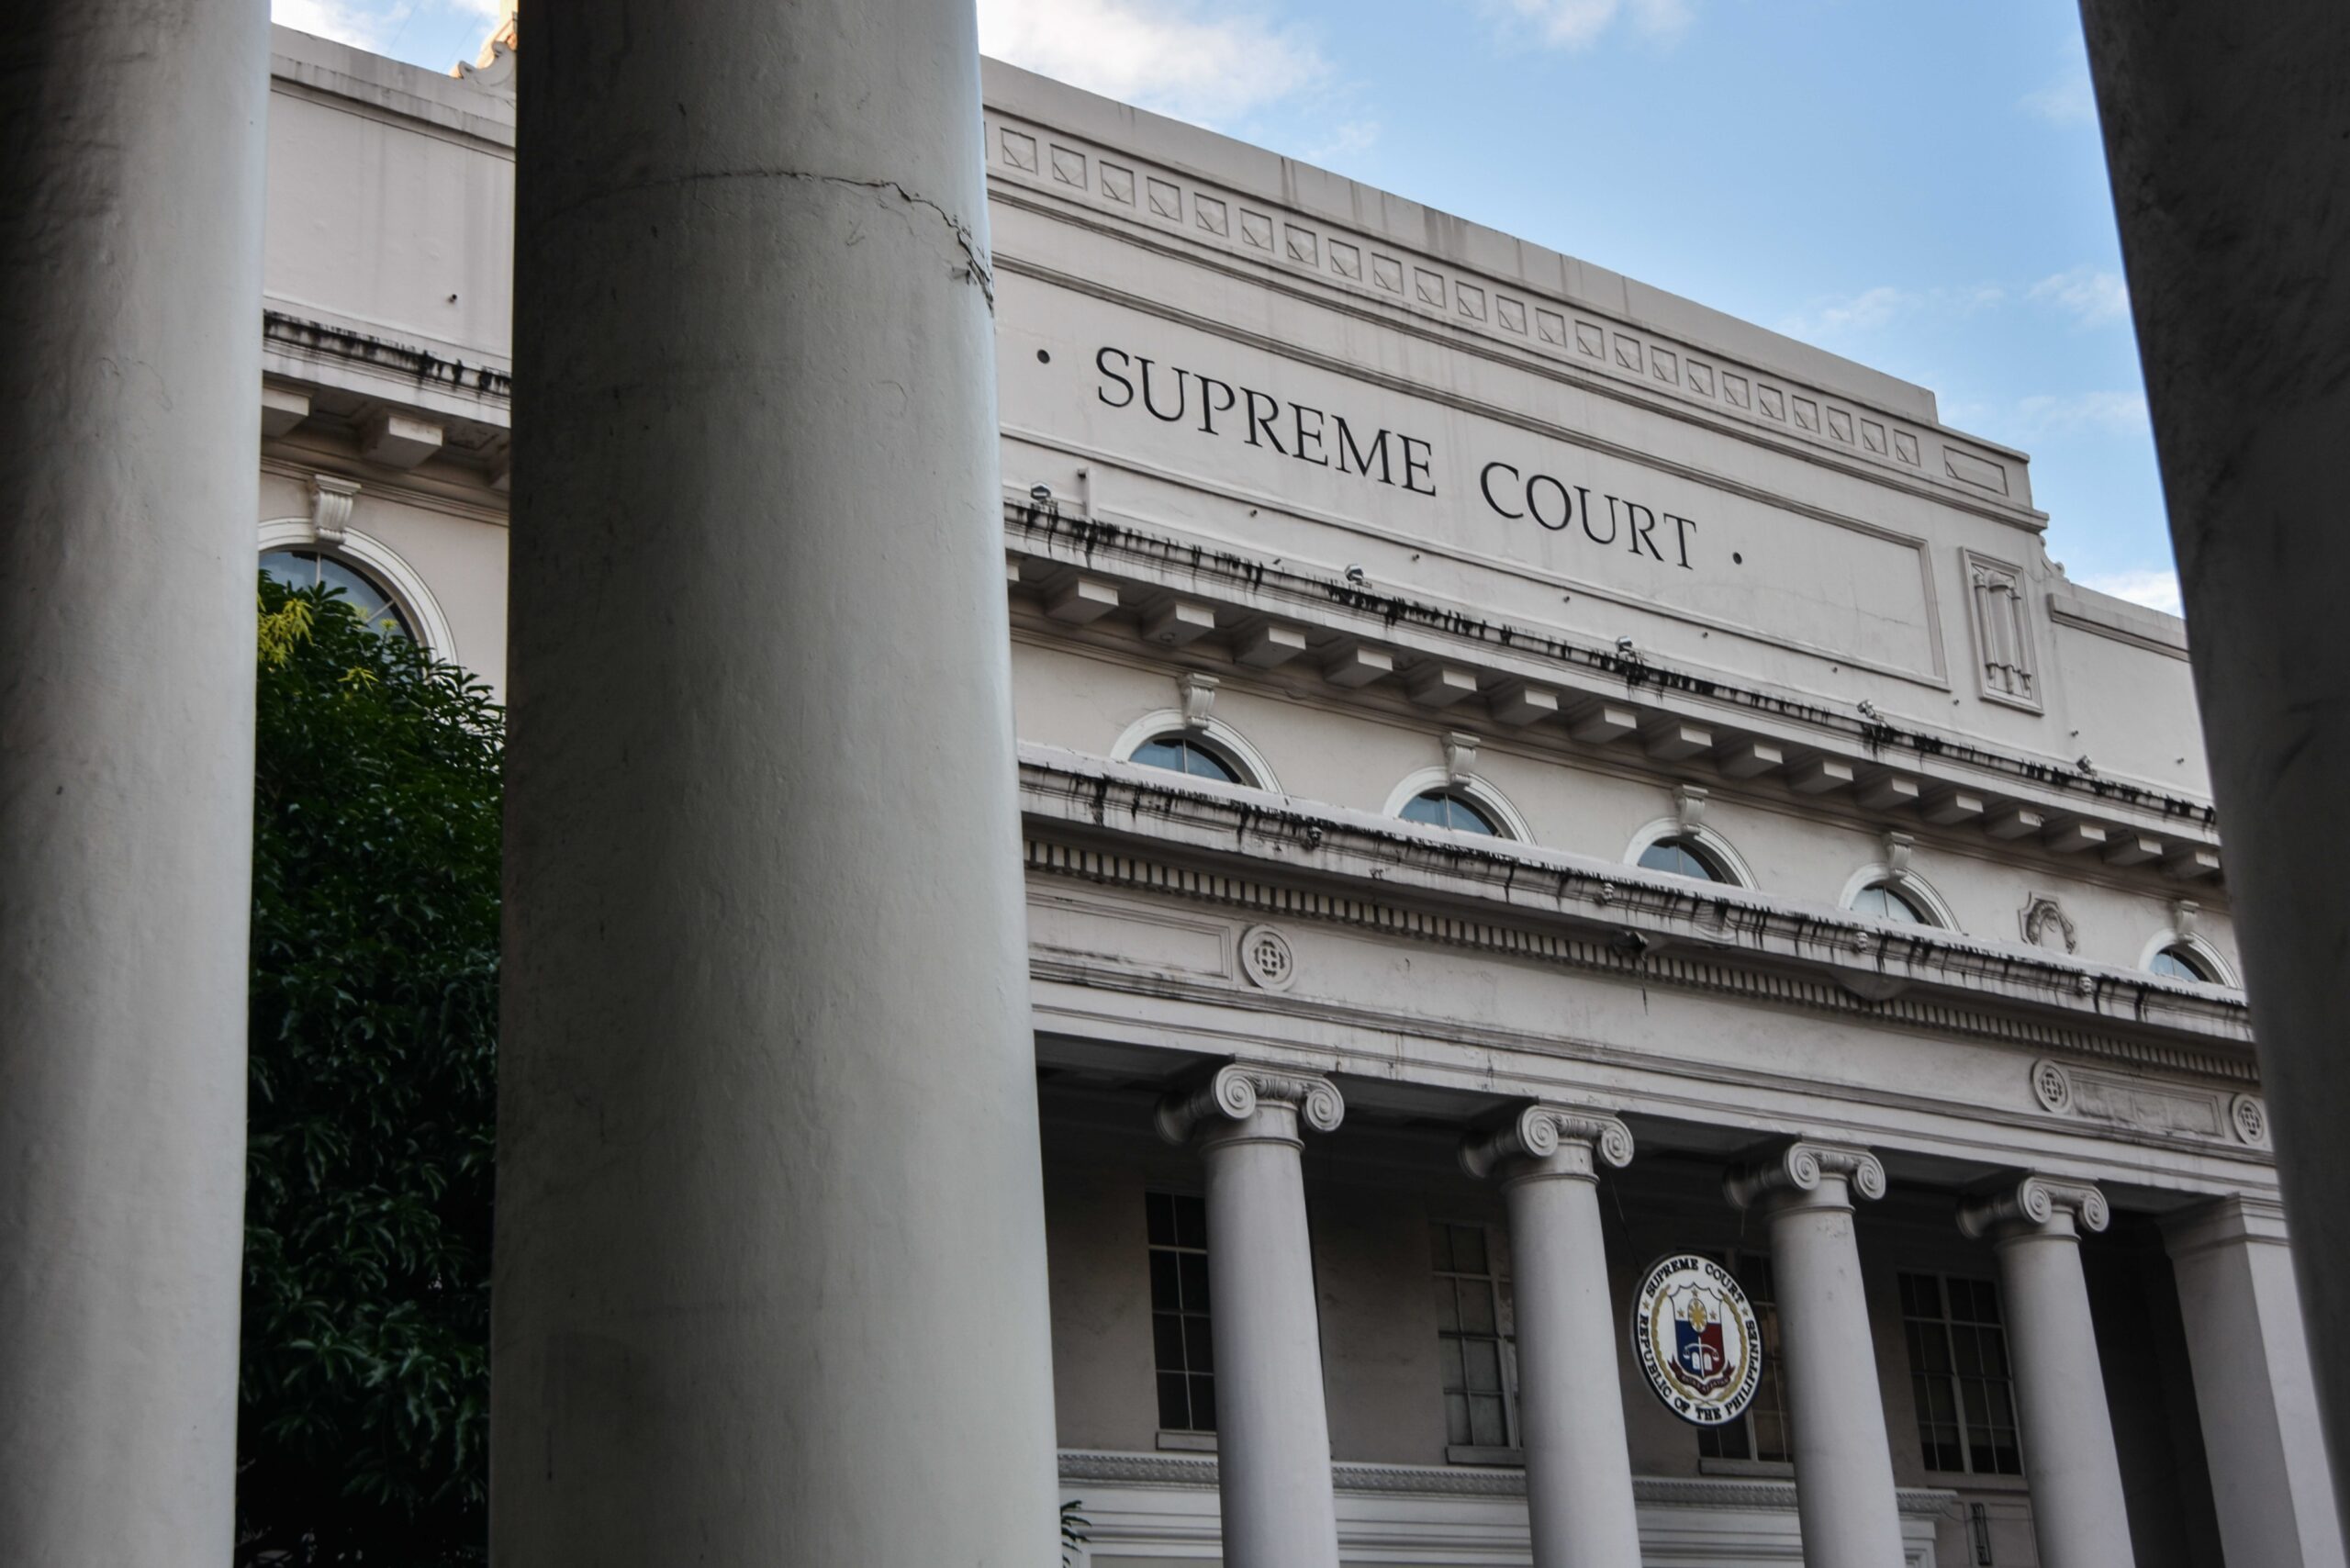 SC retains right to review martial law proclamations